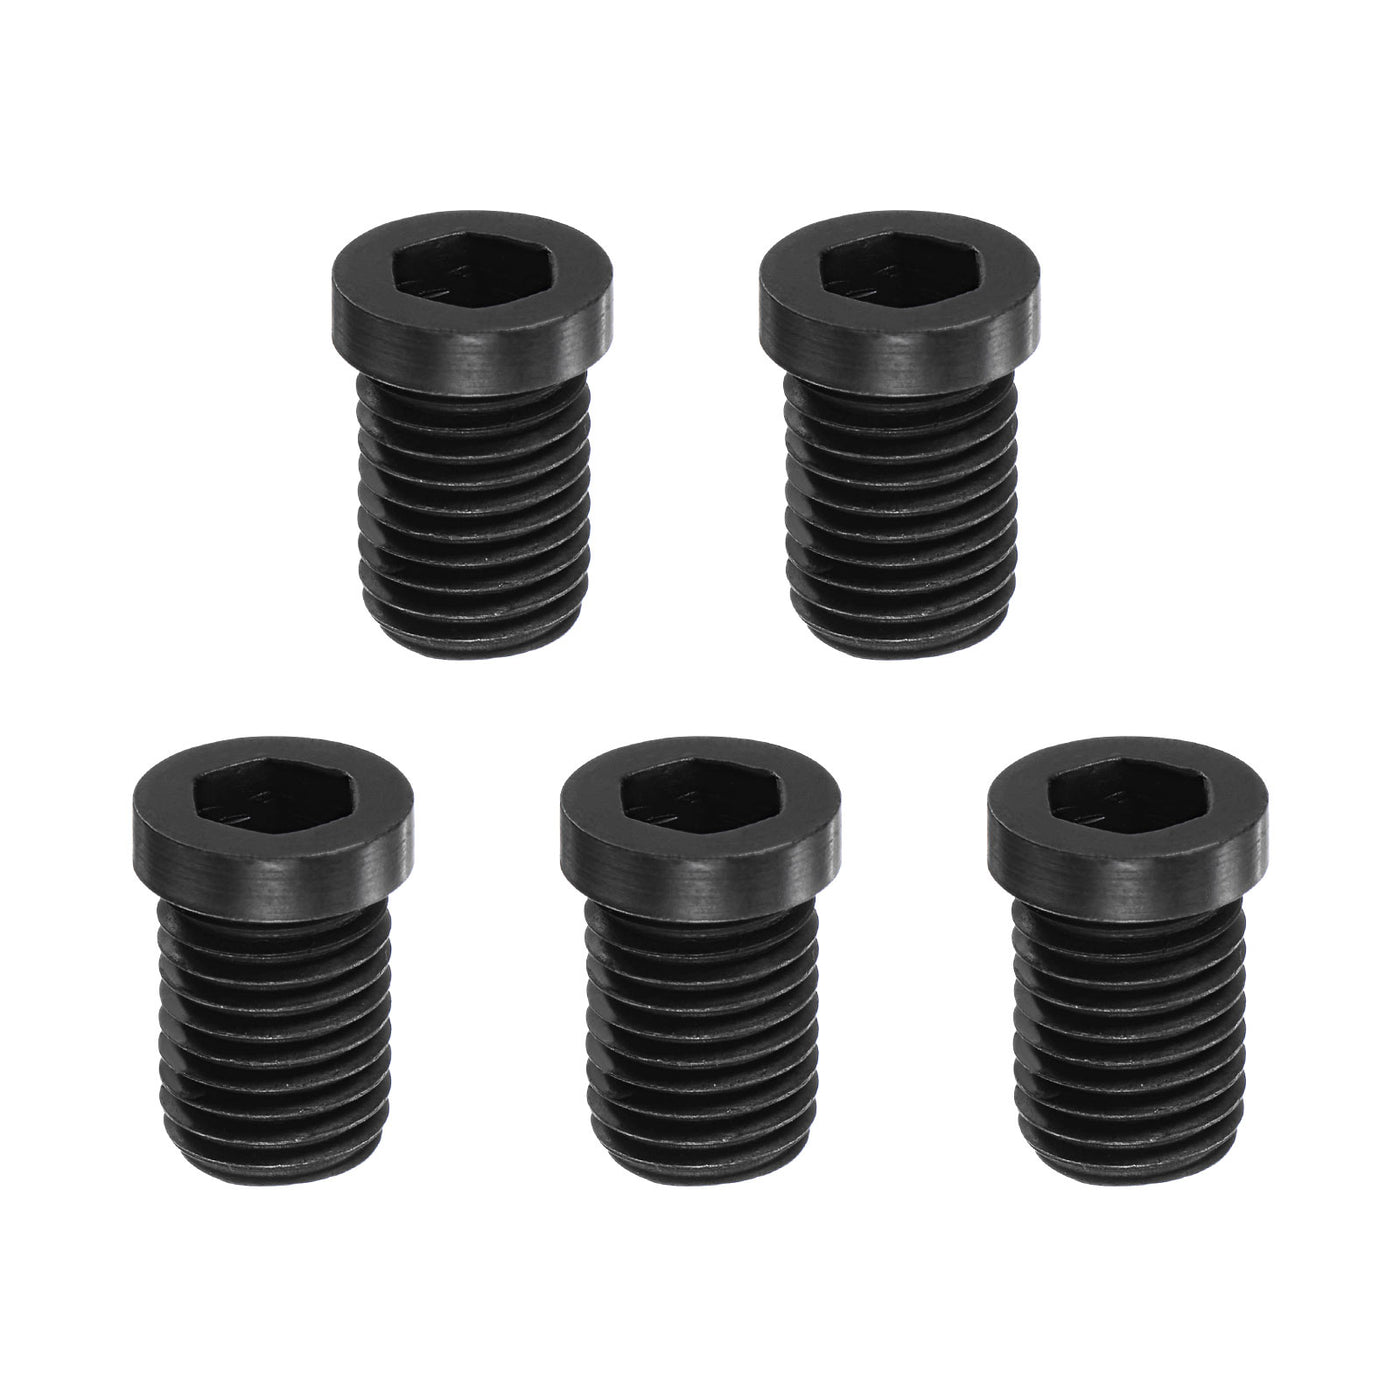 Uxcell Uxcell M8x13-1 Set Screws for Carbide Insert CNC Lathe Turning Tool Holder, 5Pcs